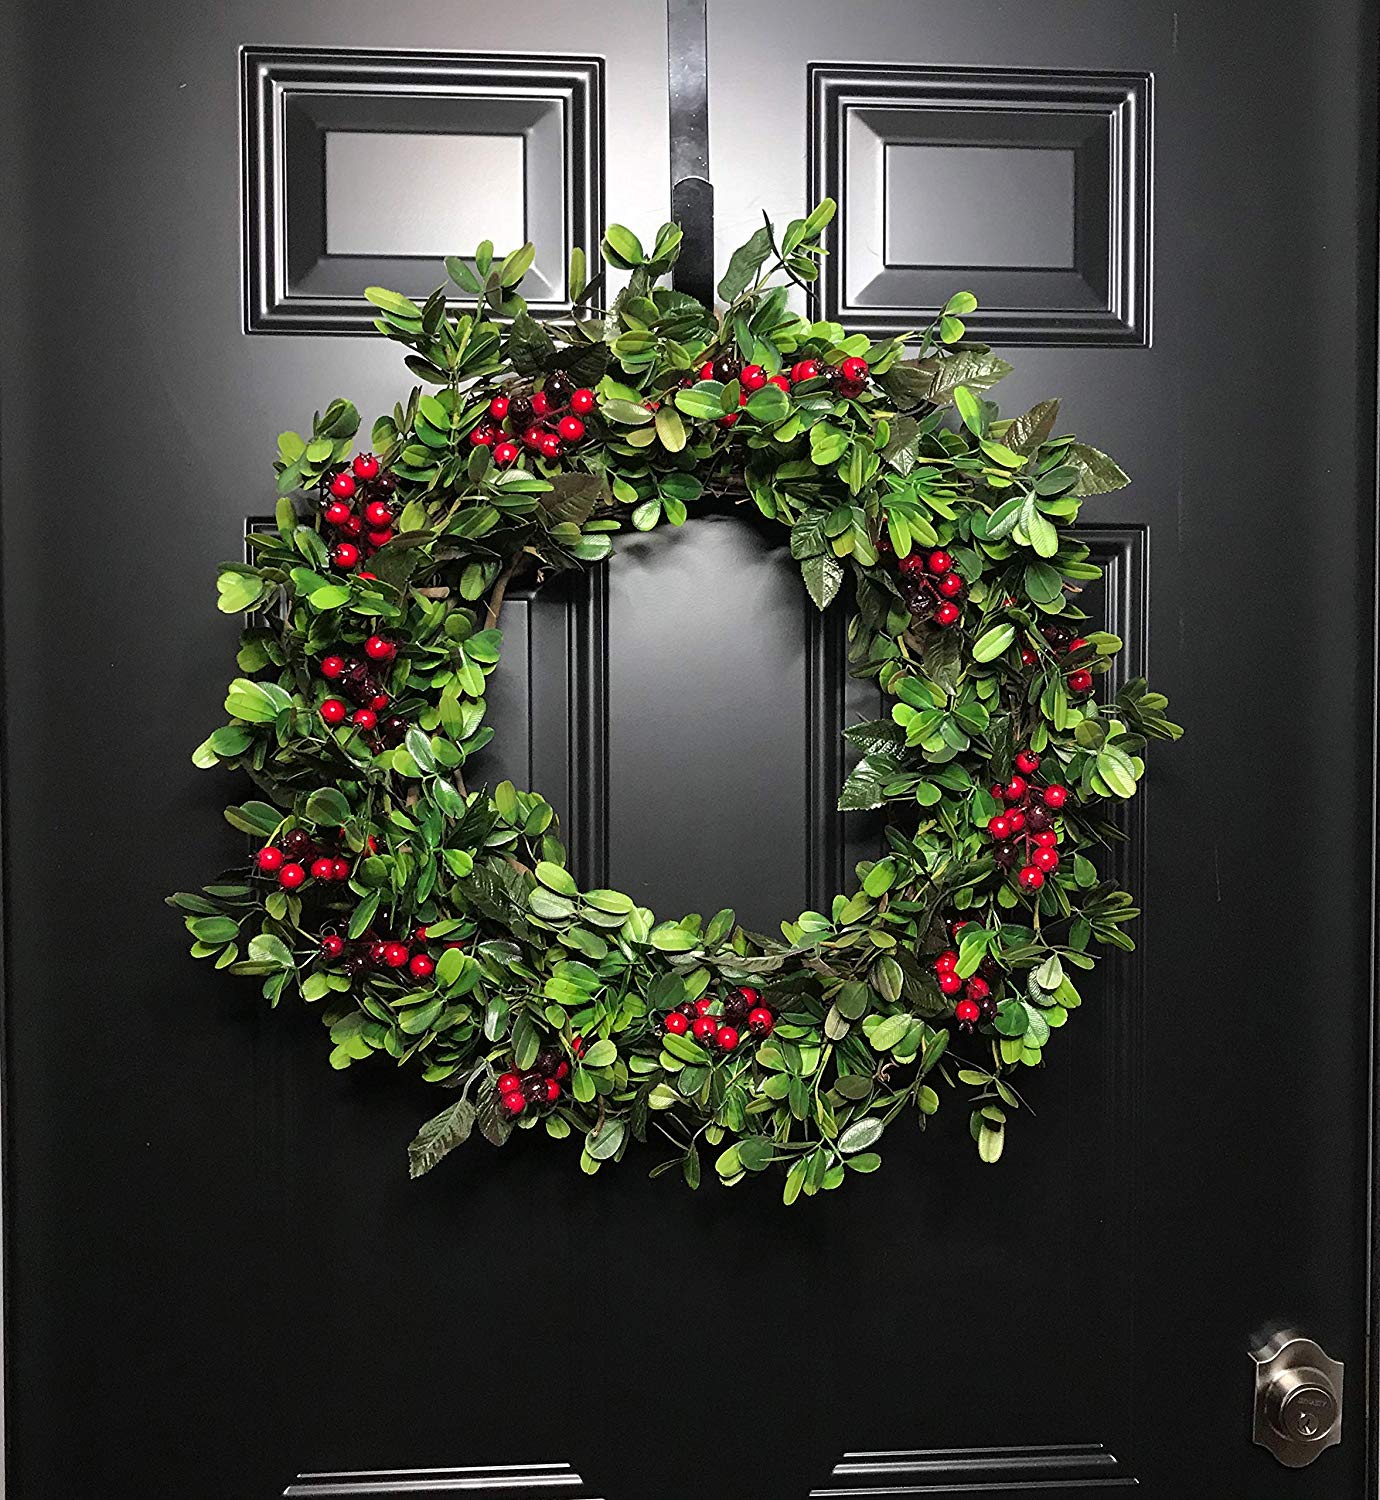 Wreath at the door - a key way to stage your home for the holidays